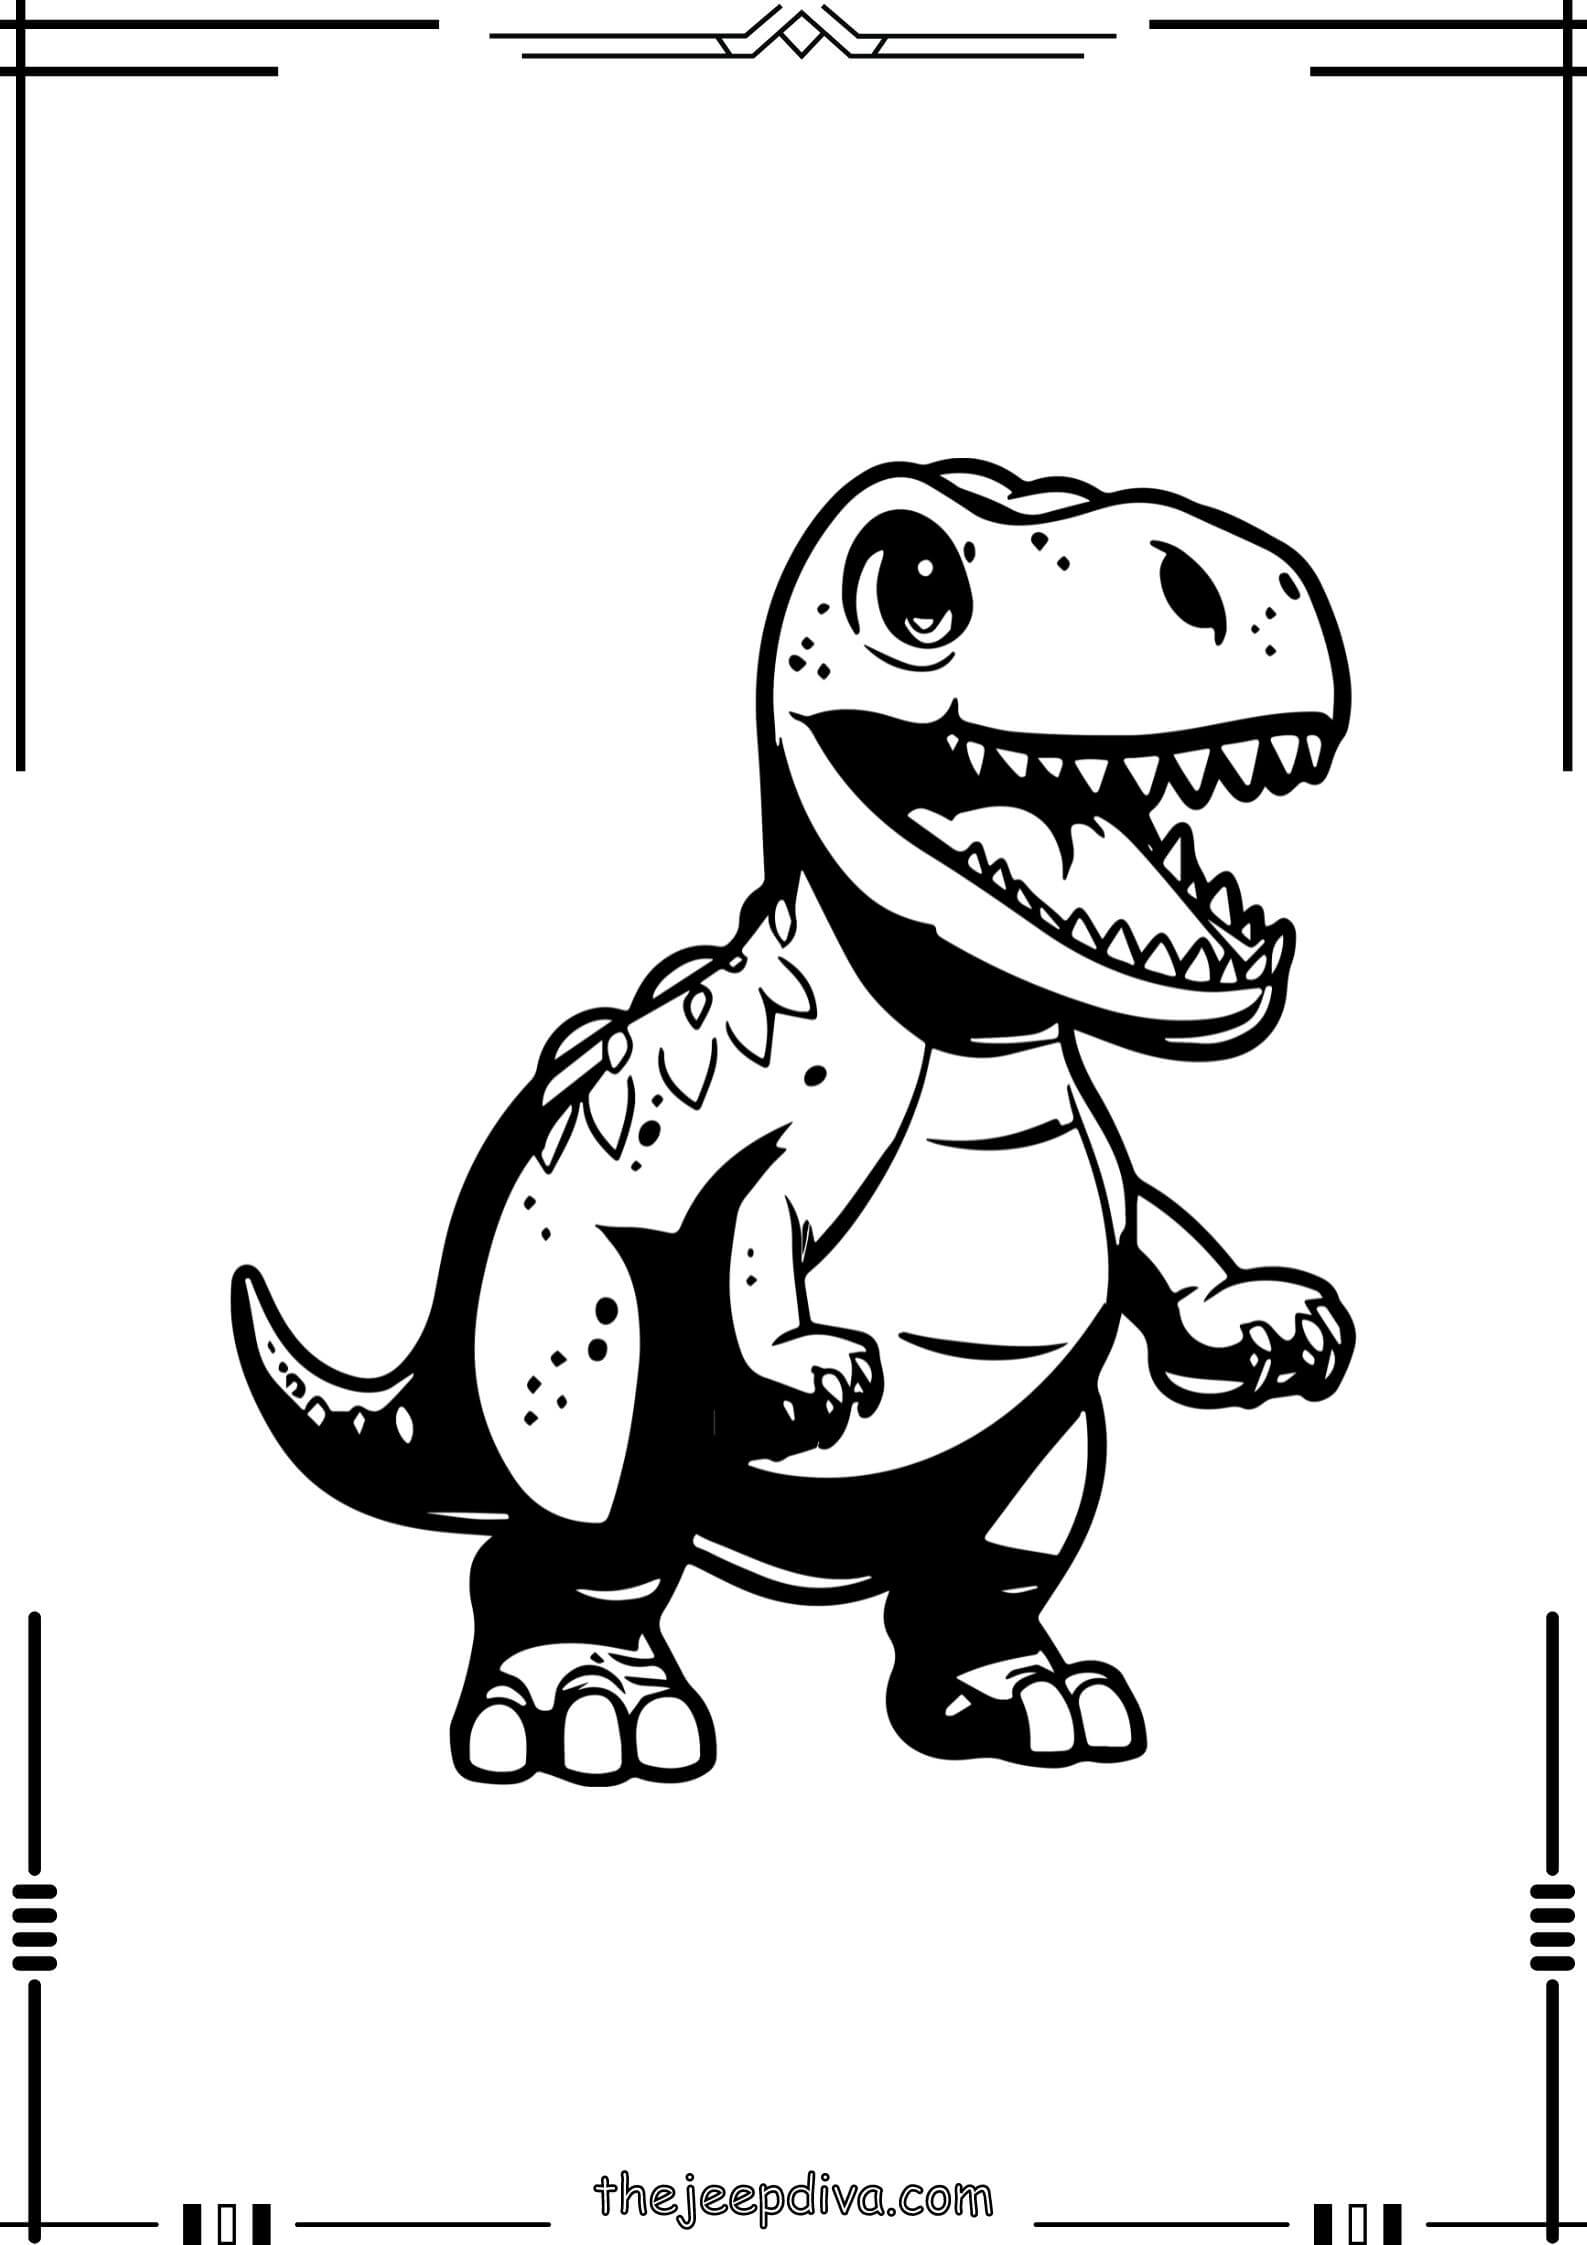 Dinosaur-Colouring-Pages-Easy-12